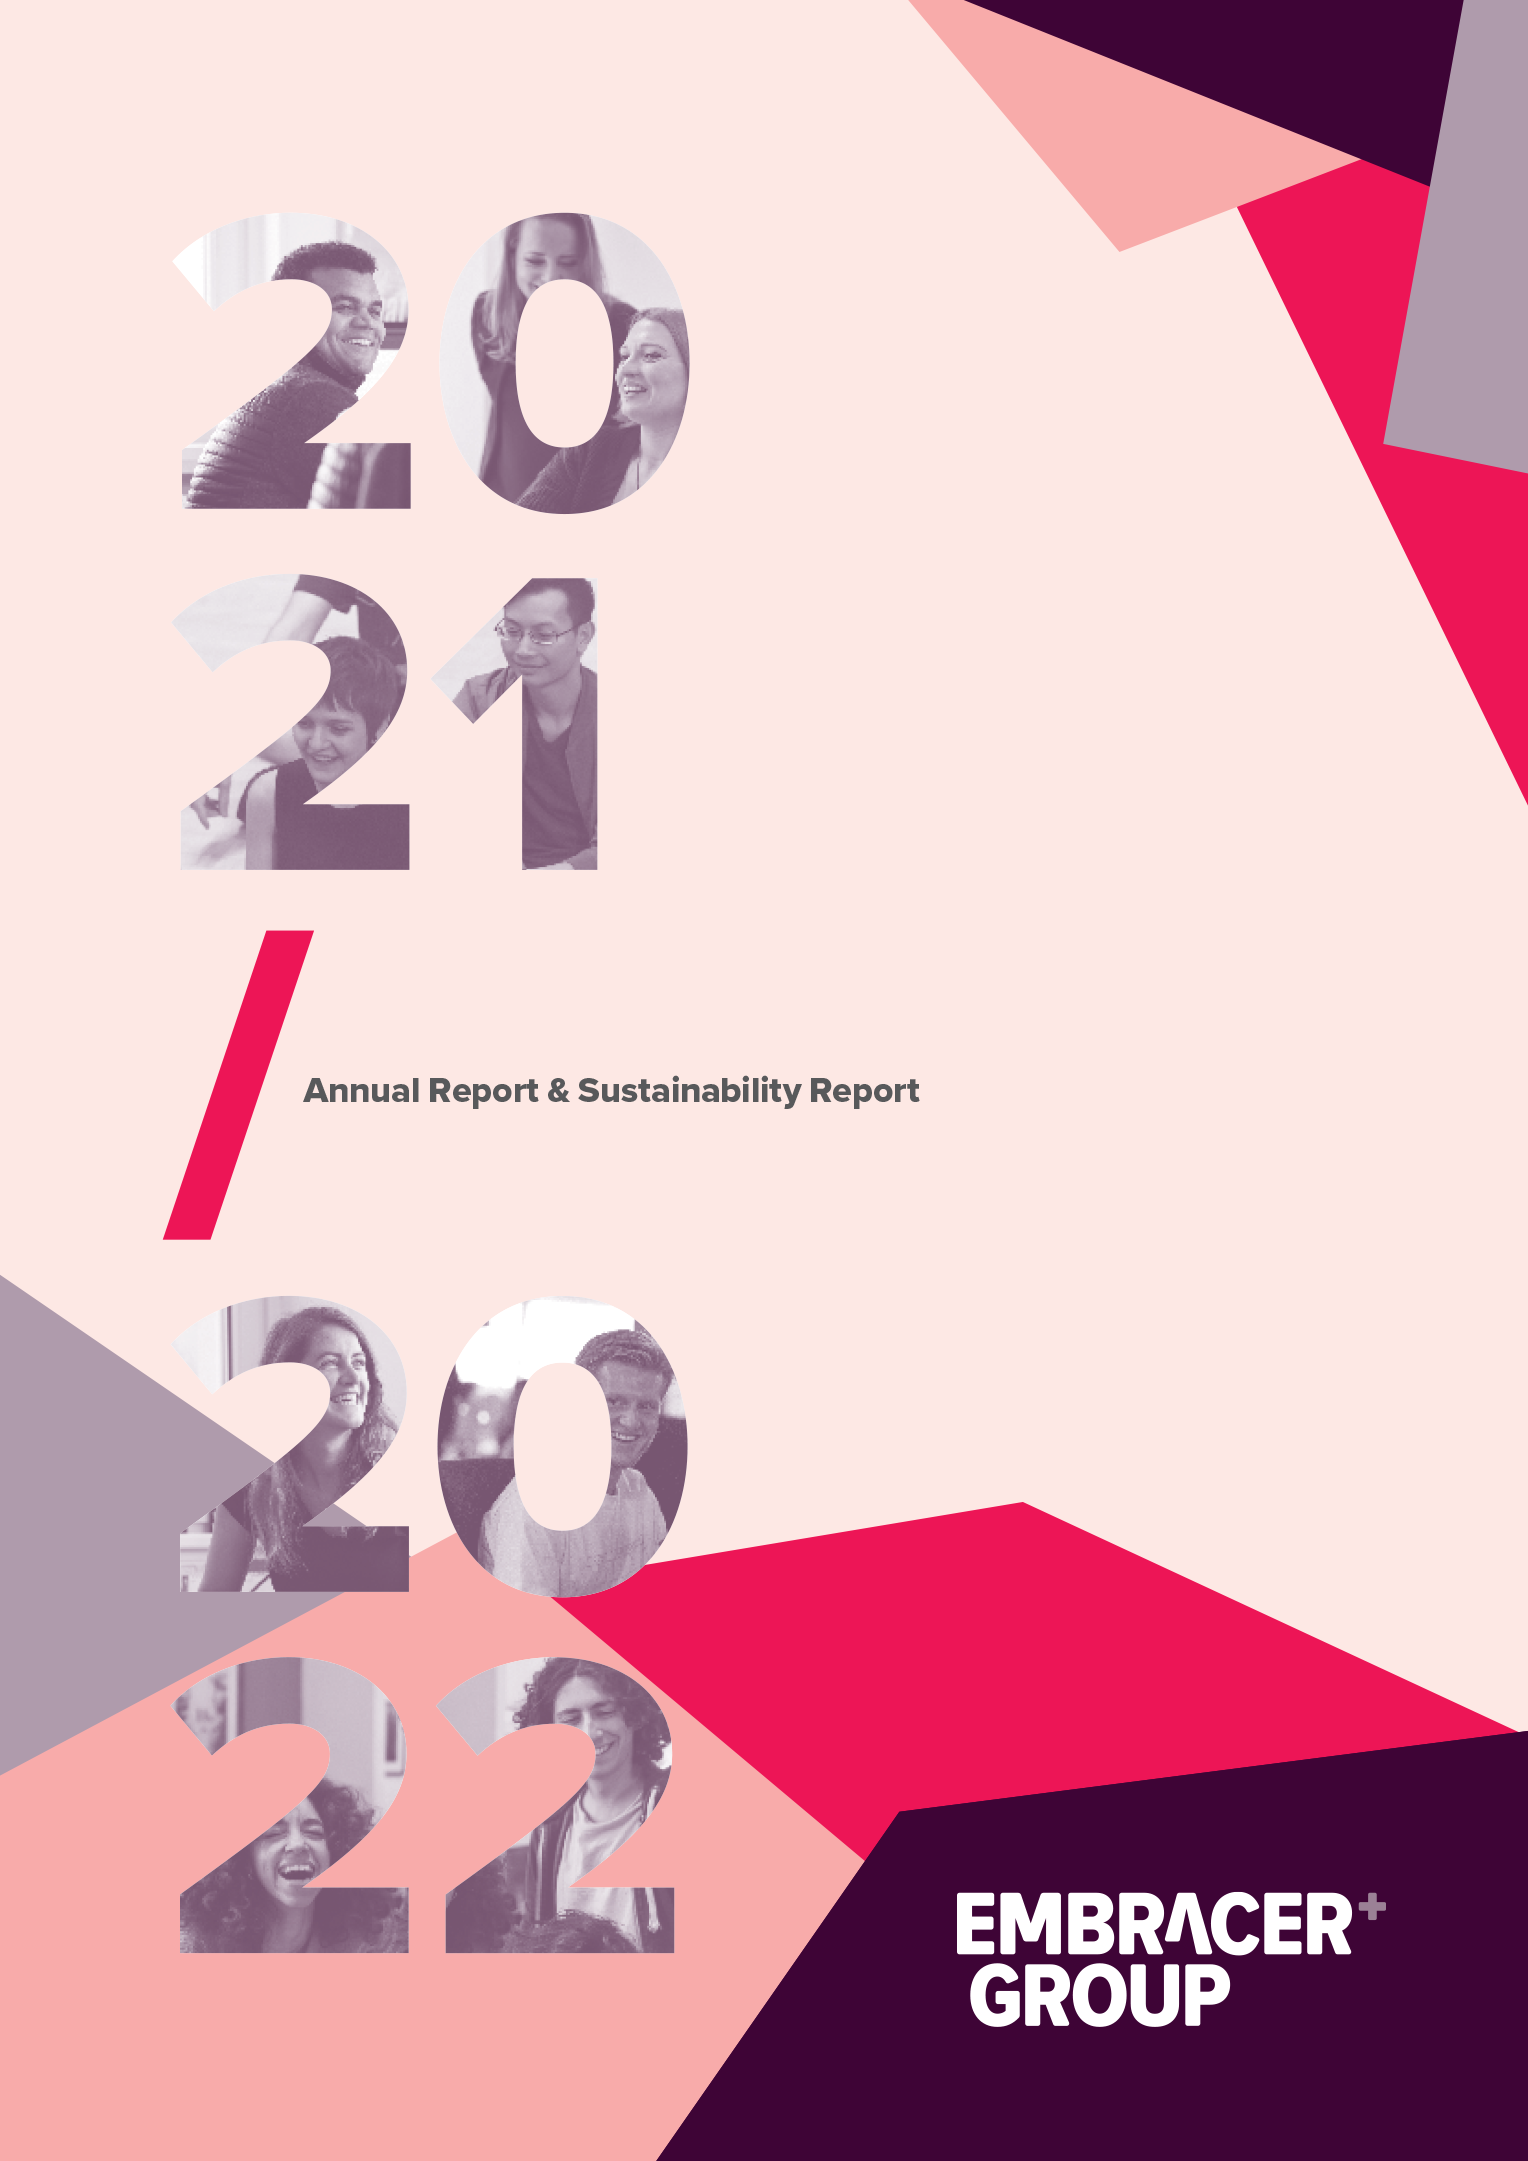 Embracer Group 2020/2021 Annual report